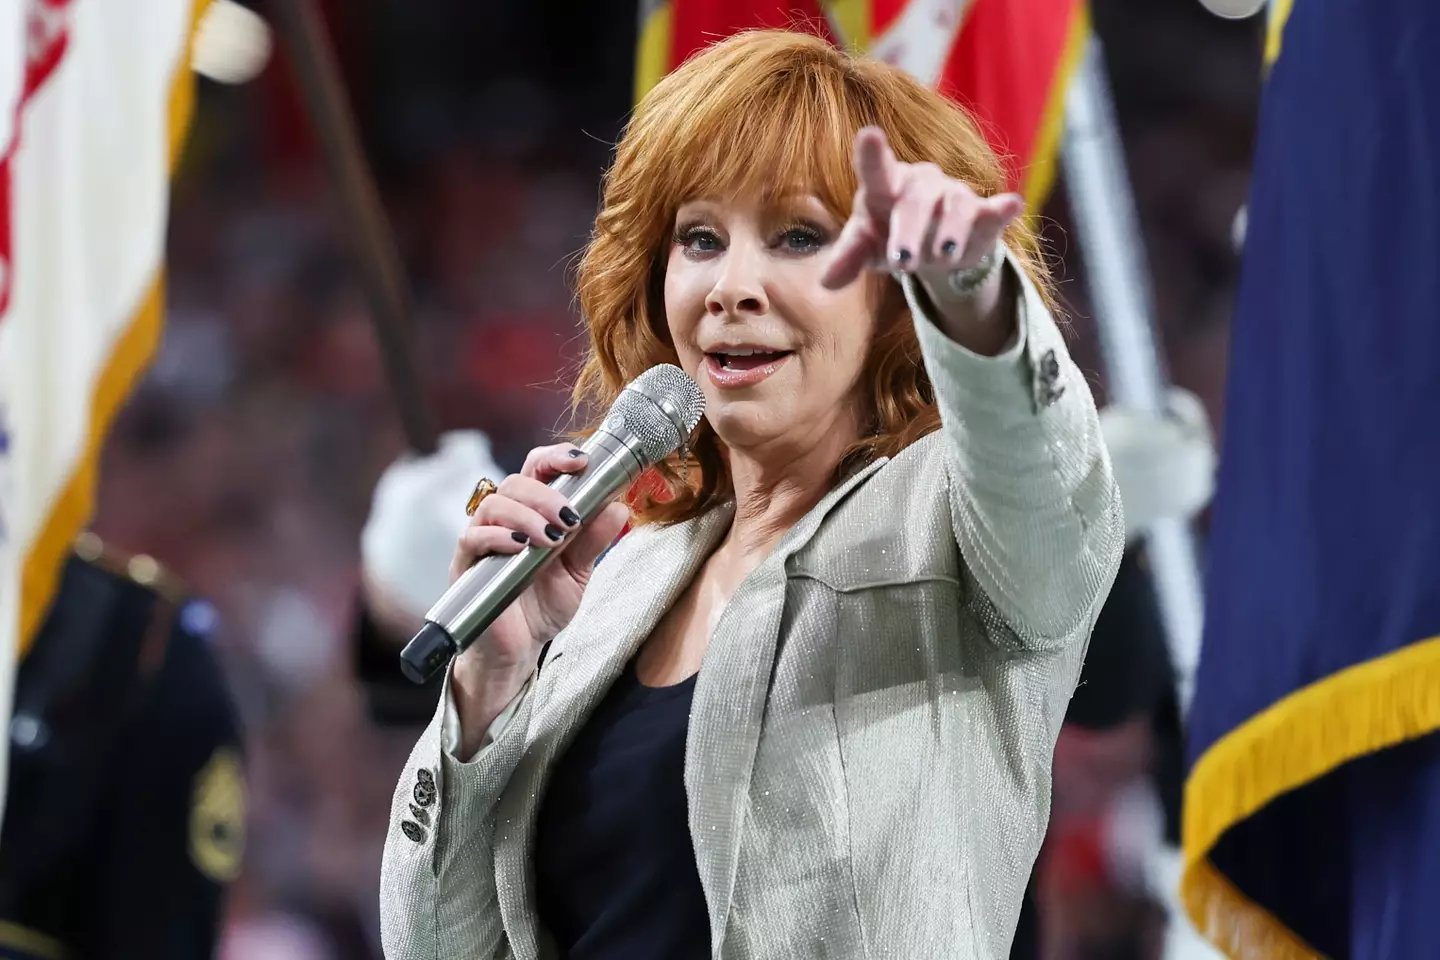 Reba McEntire has taken to Instagram to dispel rumors about her and Taylor Swift.